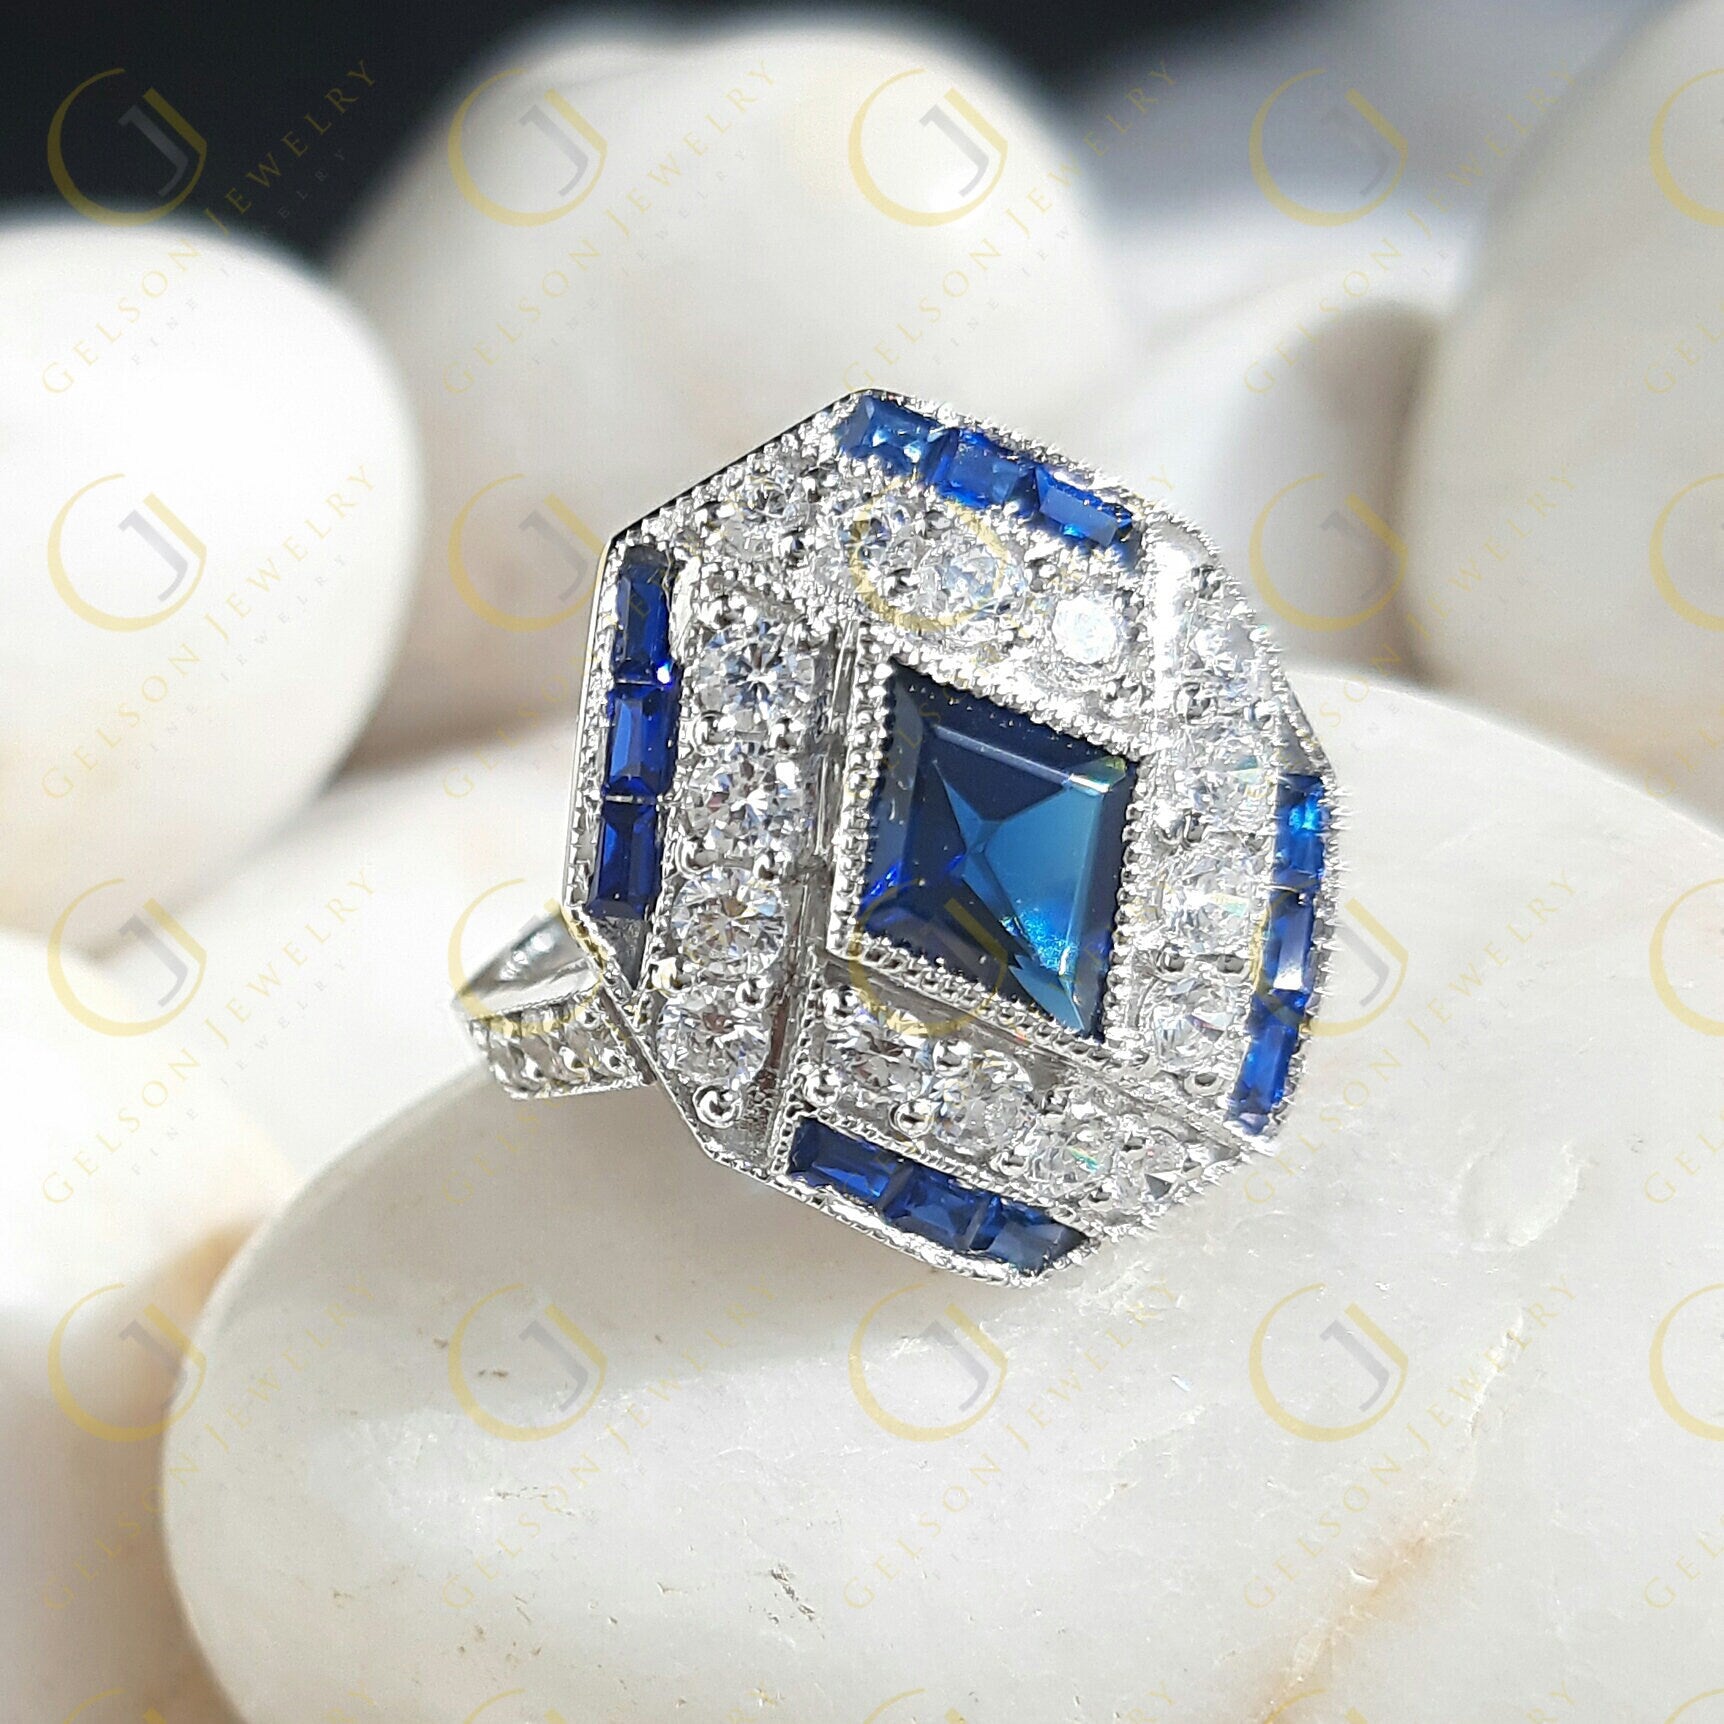 Estate Jewelry / Art Deco Engagement Ring / Blue Sapphire Vintage Wedding Ring For Women / Gift For Her